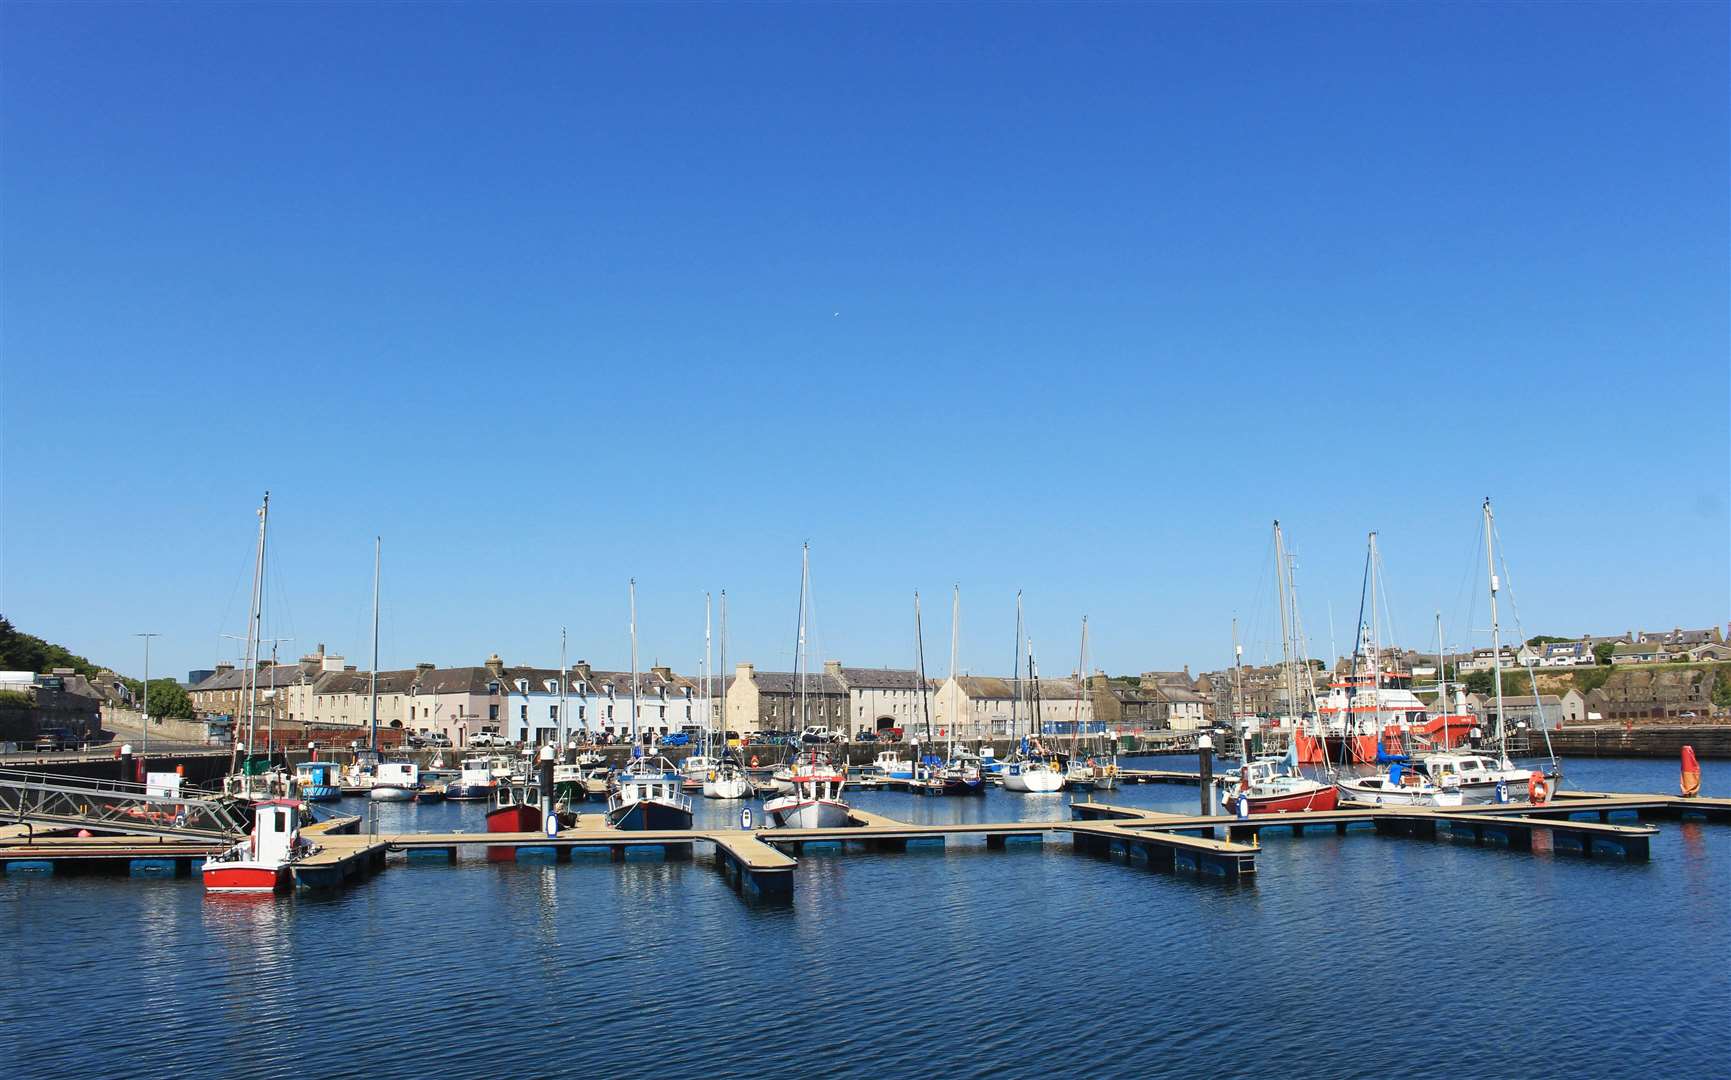 The temperature exceeded 25C in Wick on Friday. Picture: Alan Hendry (stock image)